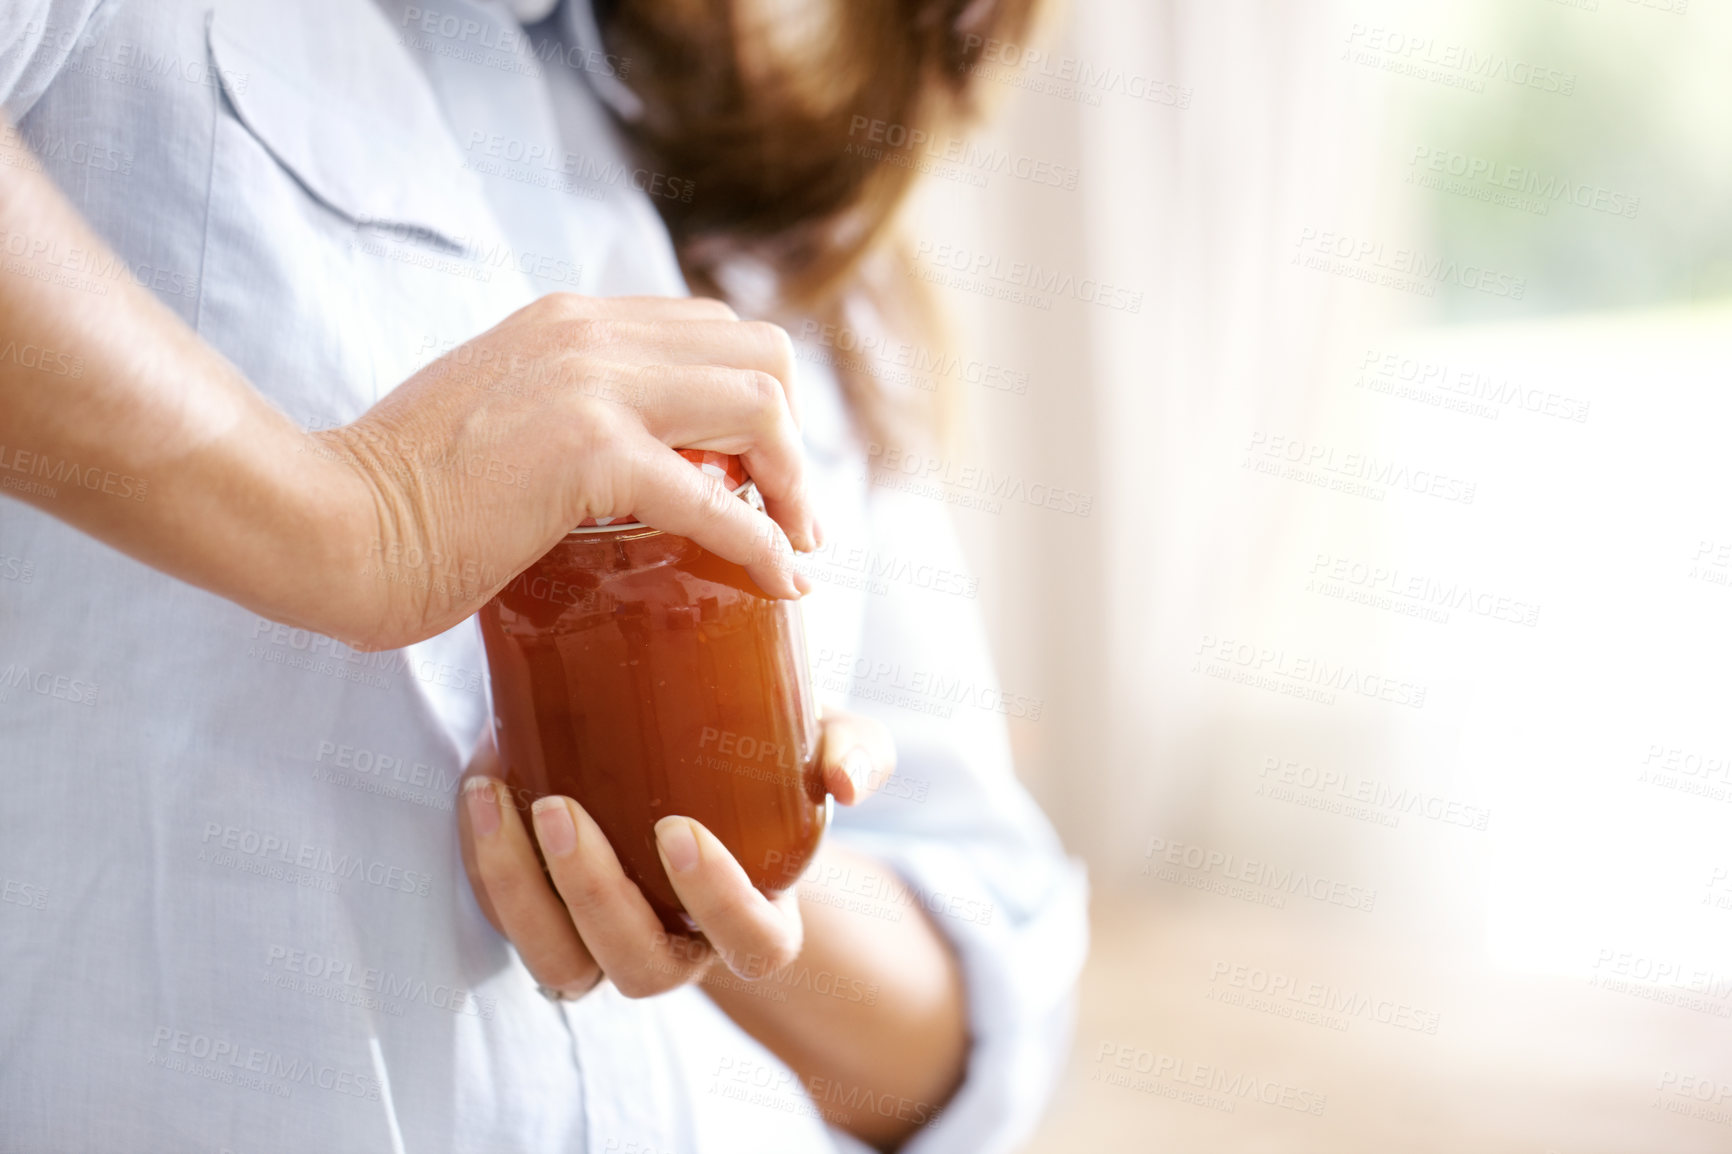 Buy stock photo Cropped image of a woman trying to open a jar in the kitchen